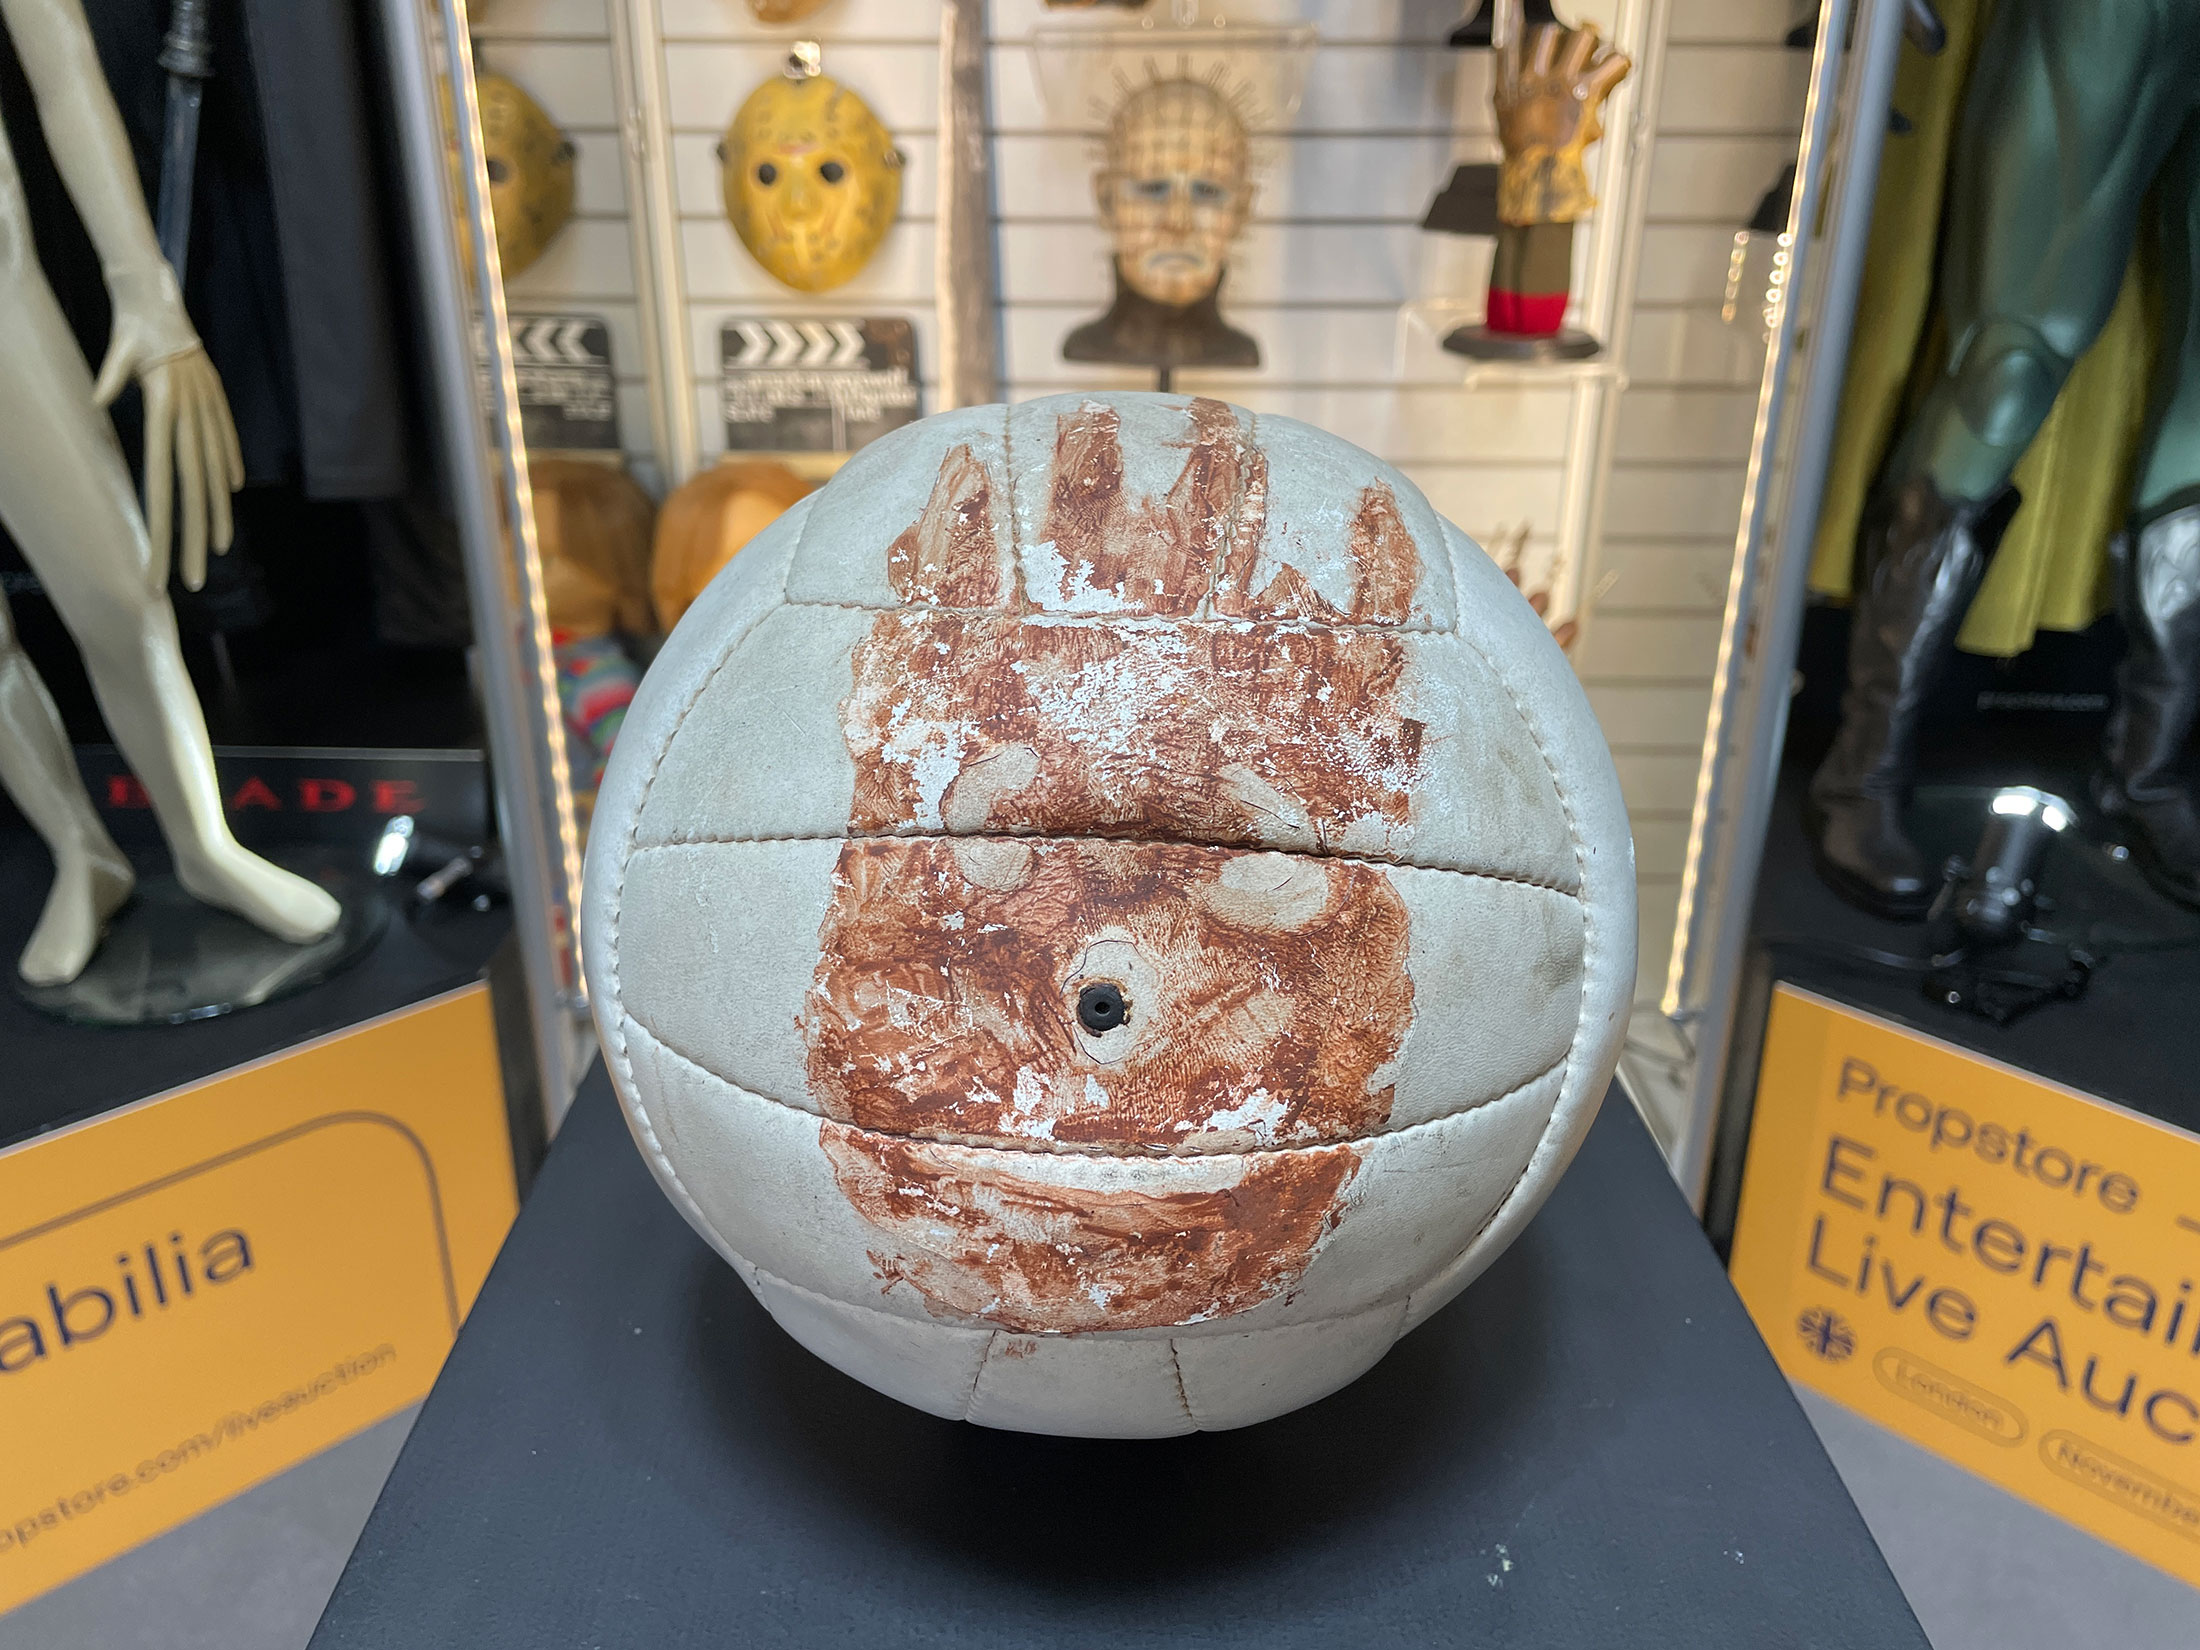 Movie Prop Auction Sees Wilson Volleyball Sell for £75,000 - Bloomberg